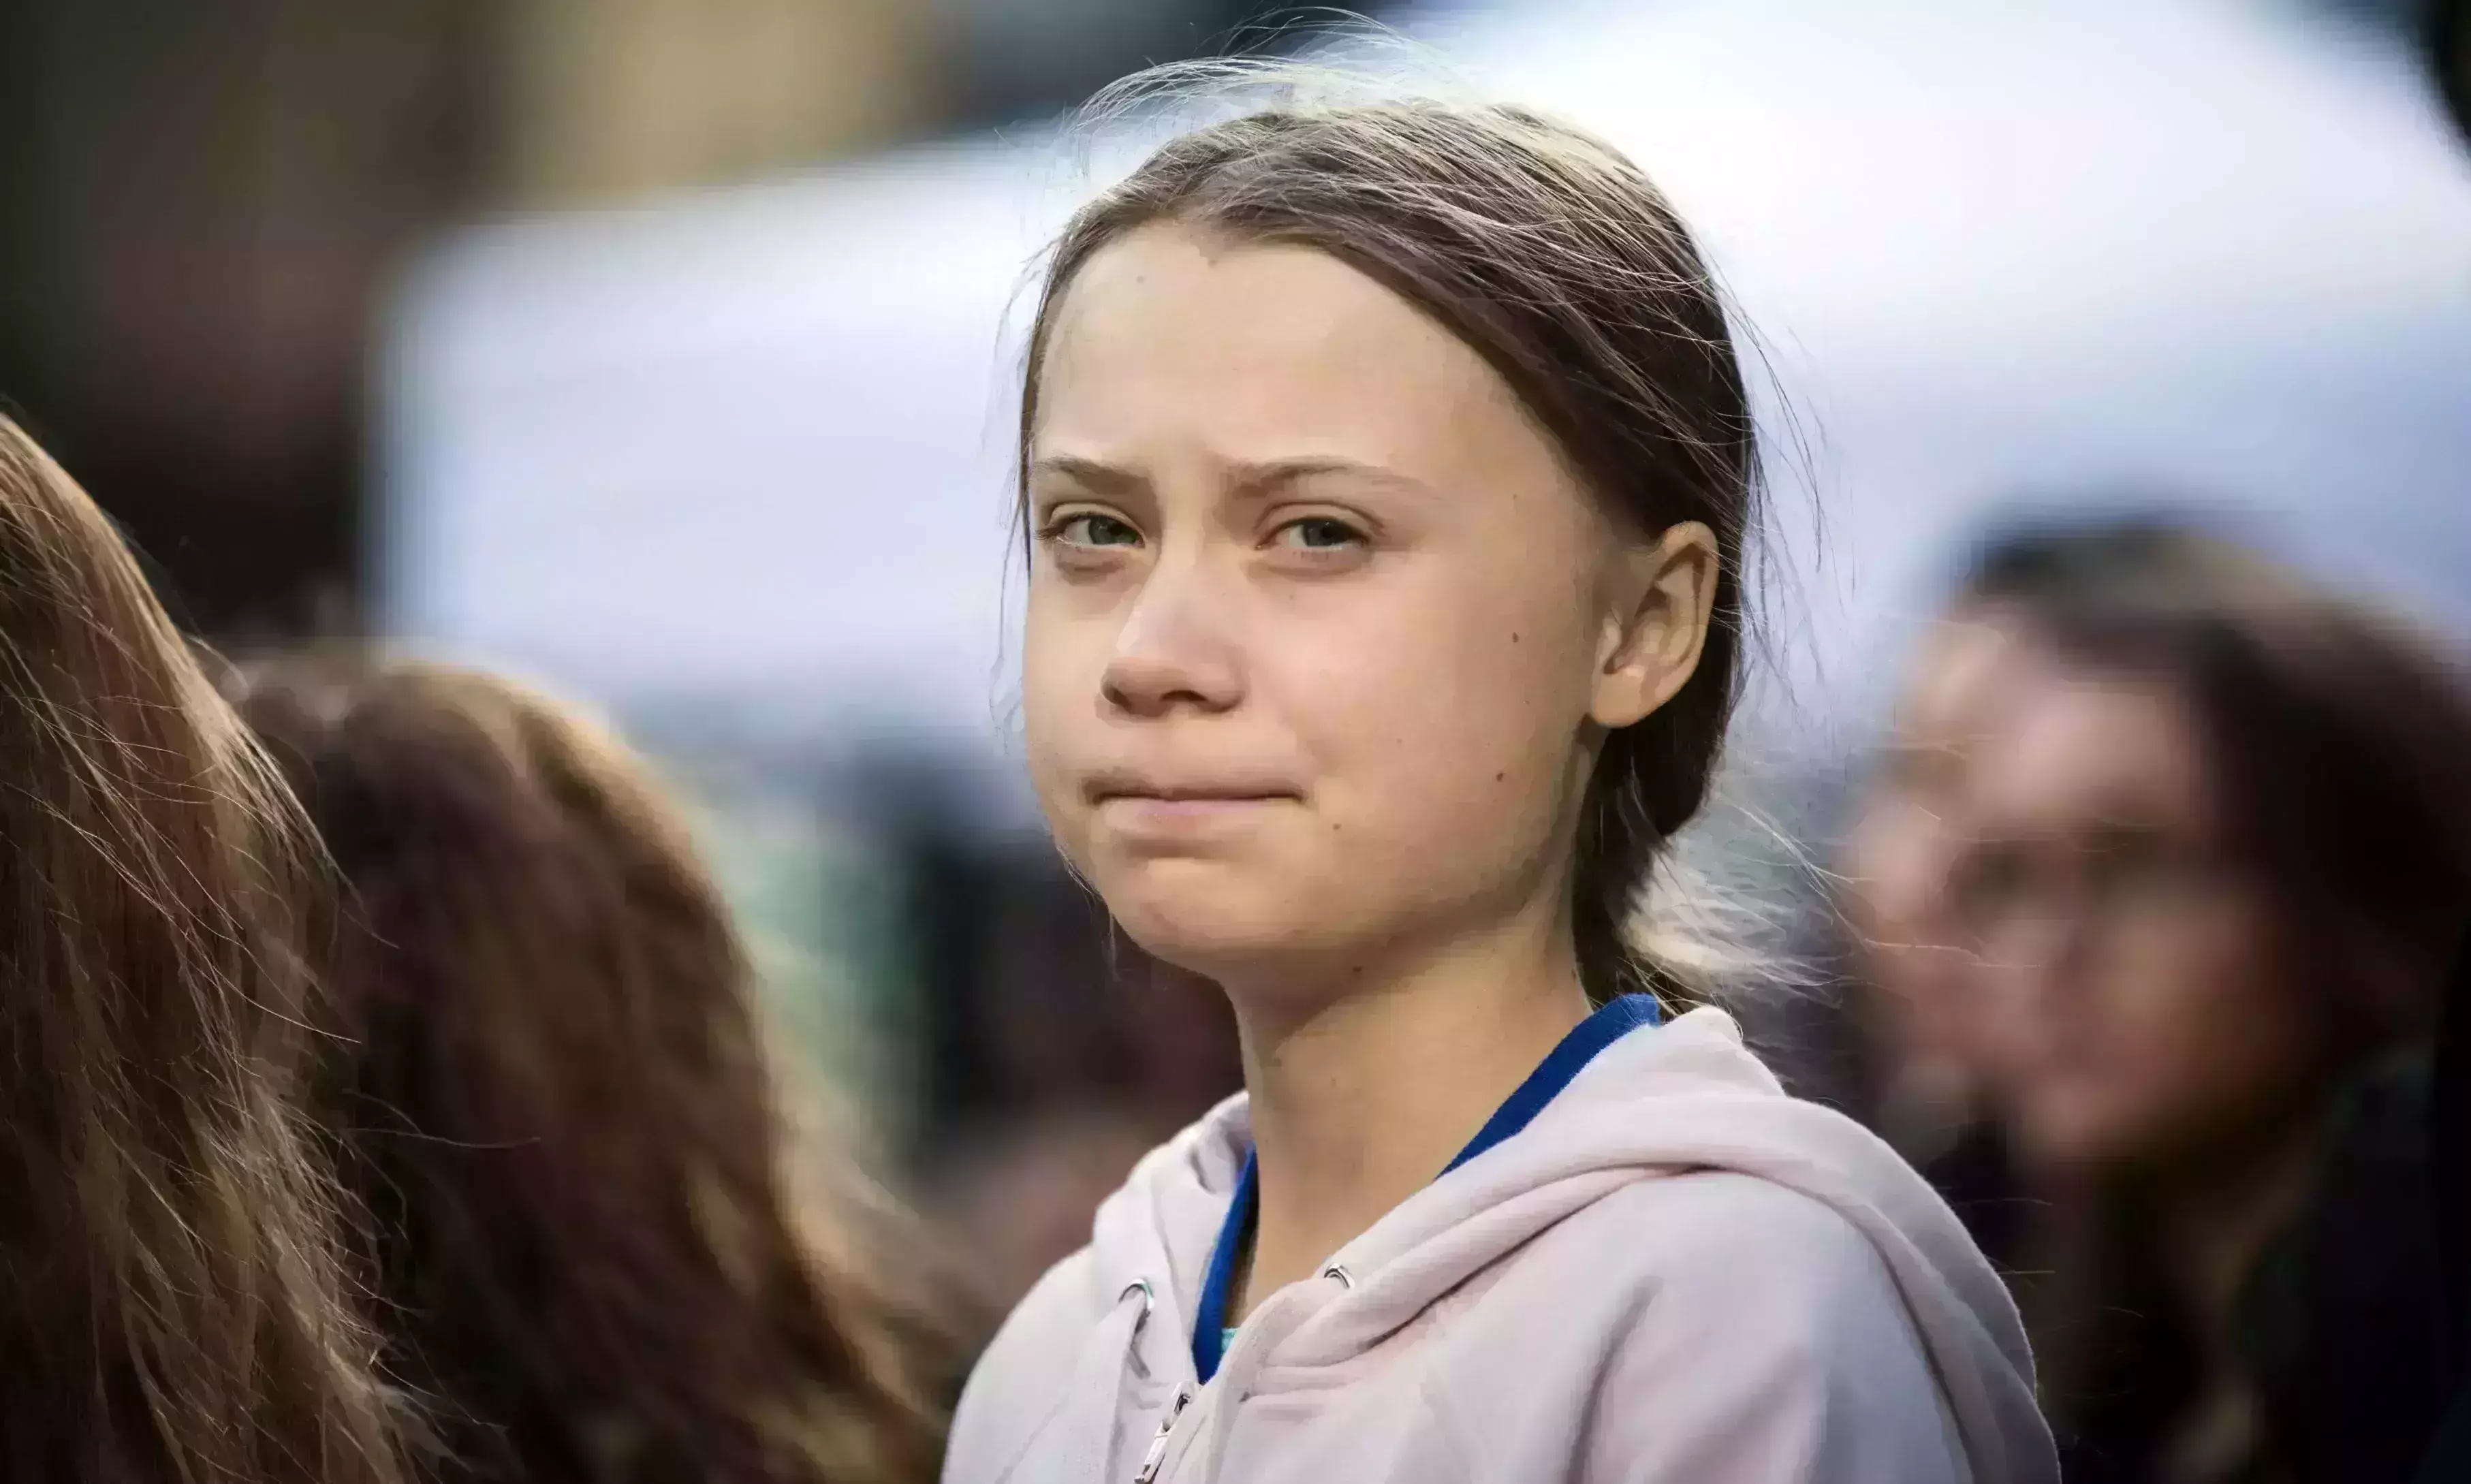 Greta Thunberg toolkit for protests sparks row in India